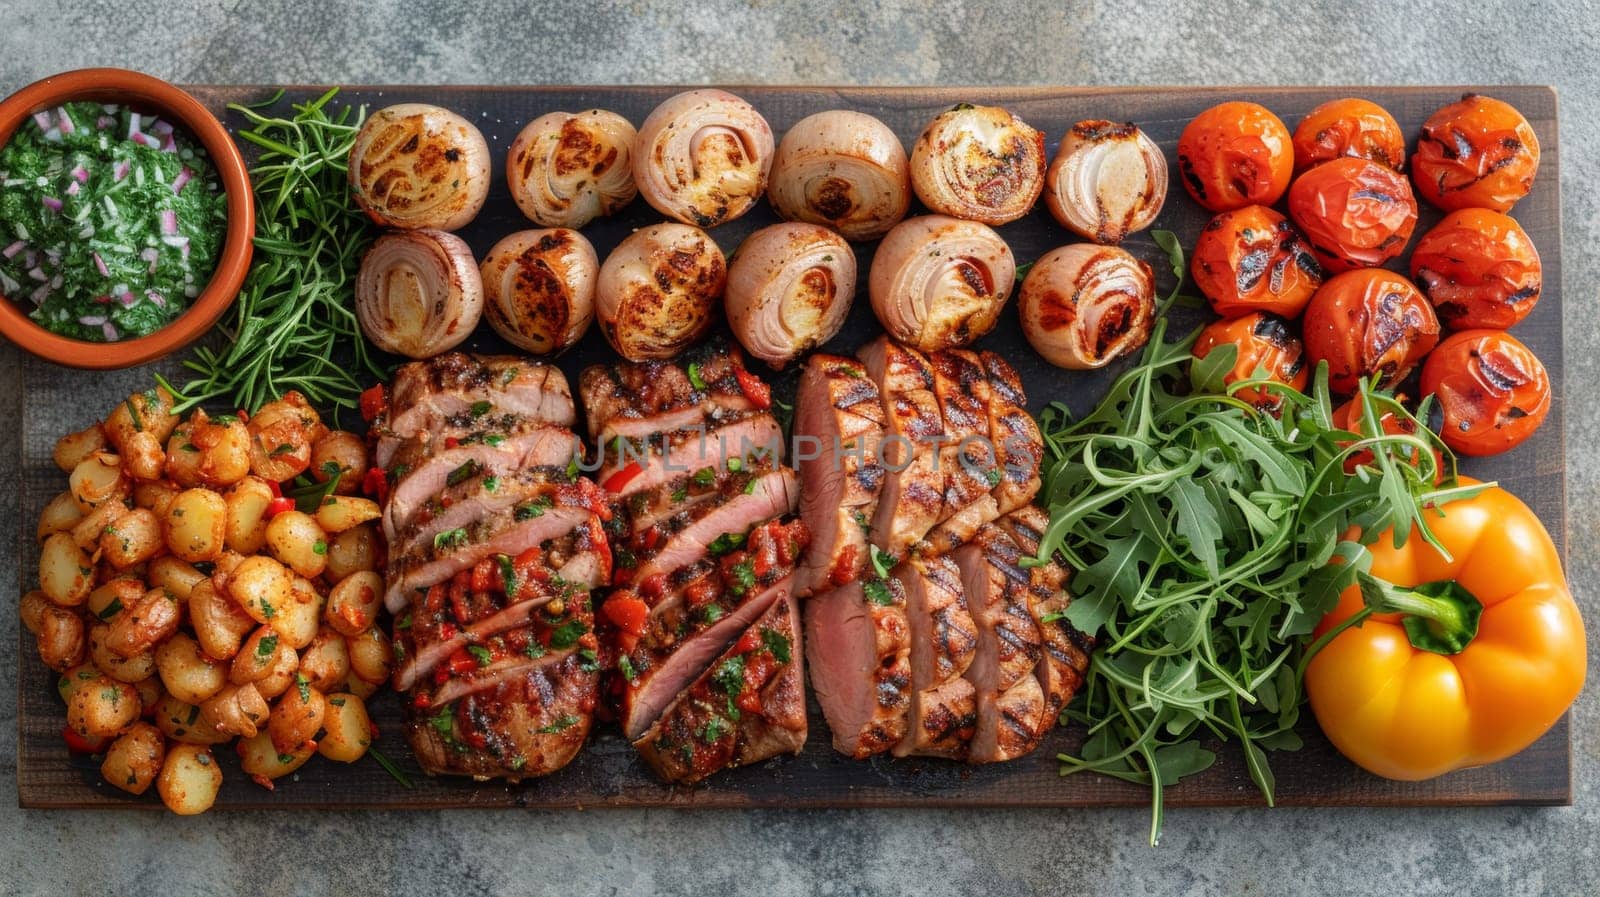 A large platter of meat and vegetables on a wooden board